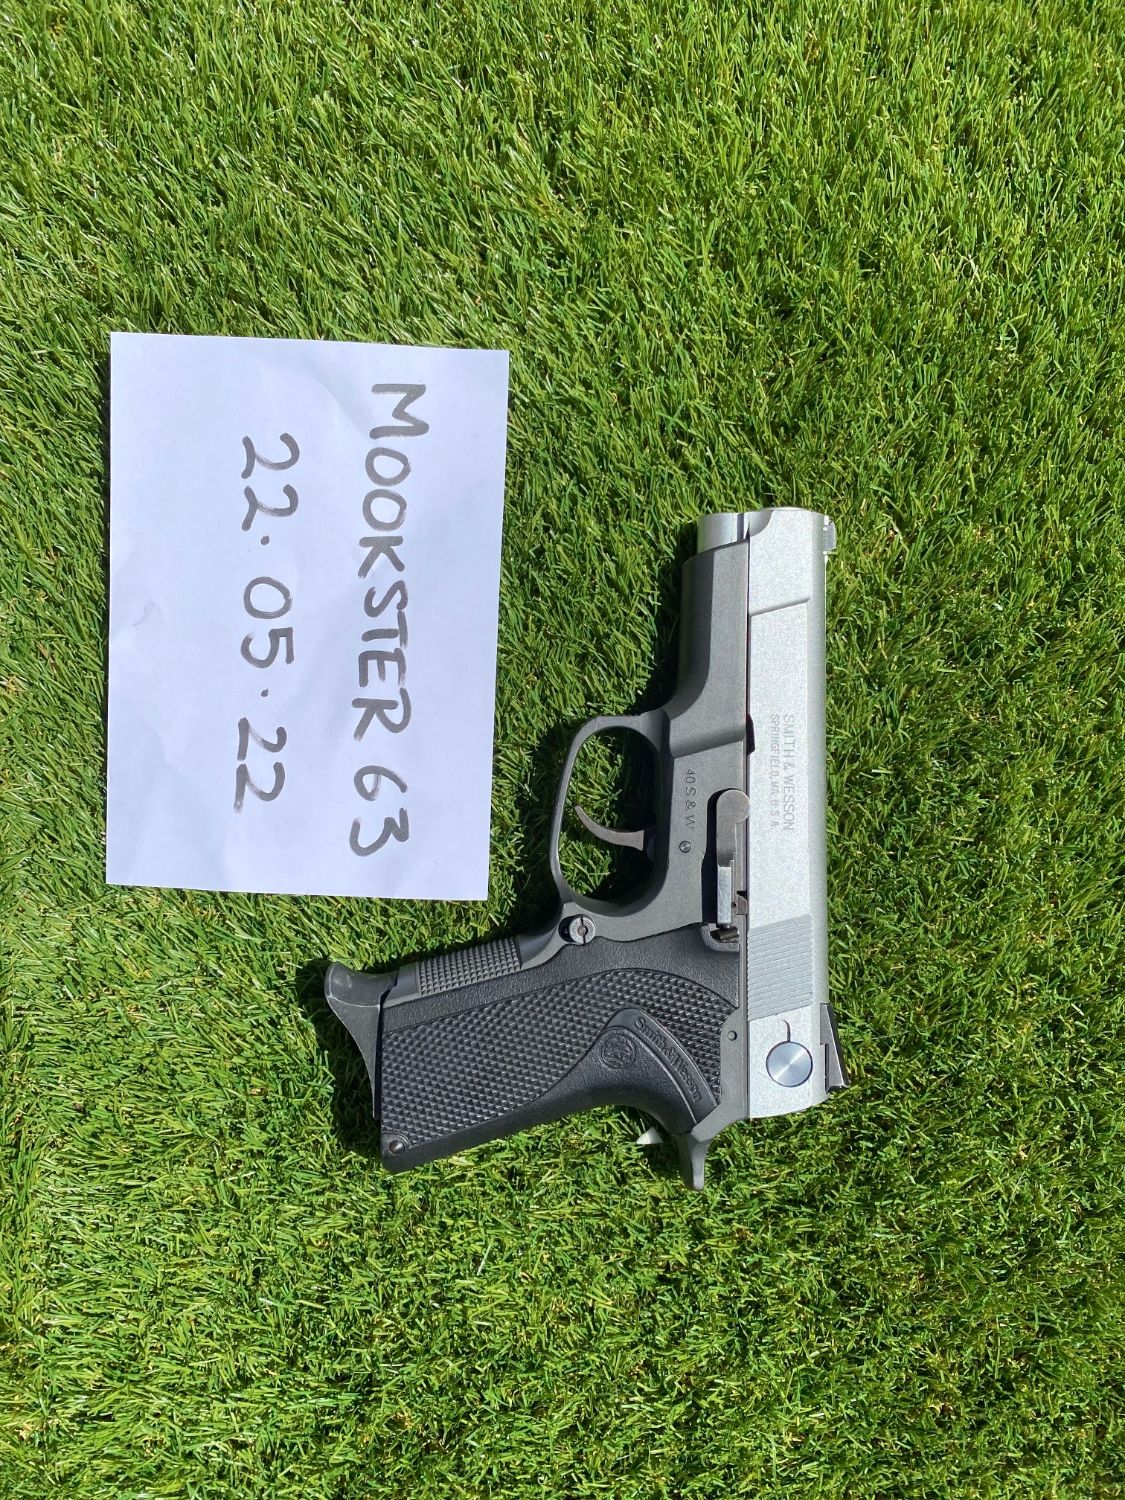 Rare S&W Shorty 40 - Gas Pistols - Airsoft Forums UK